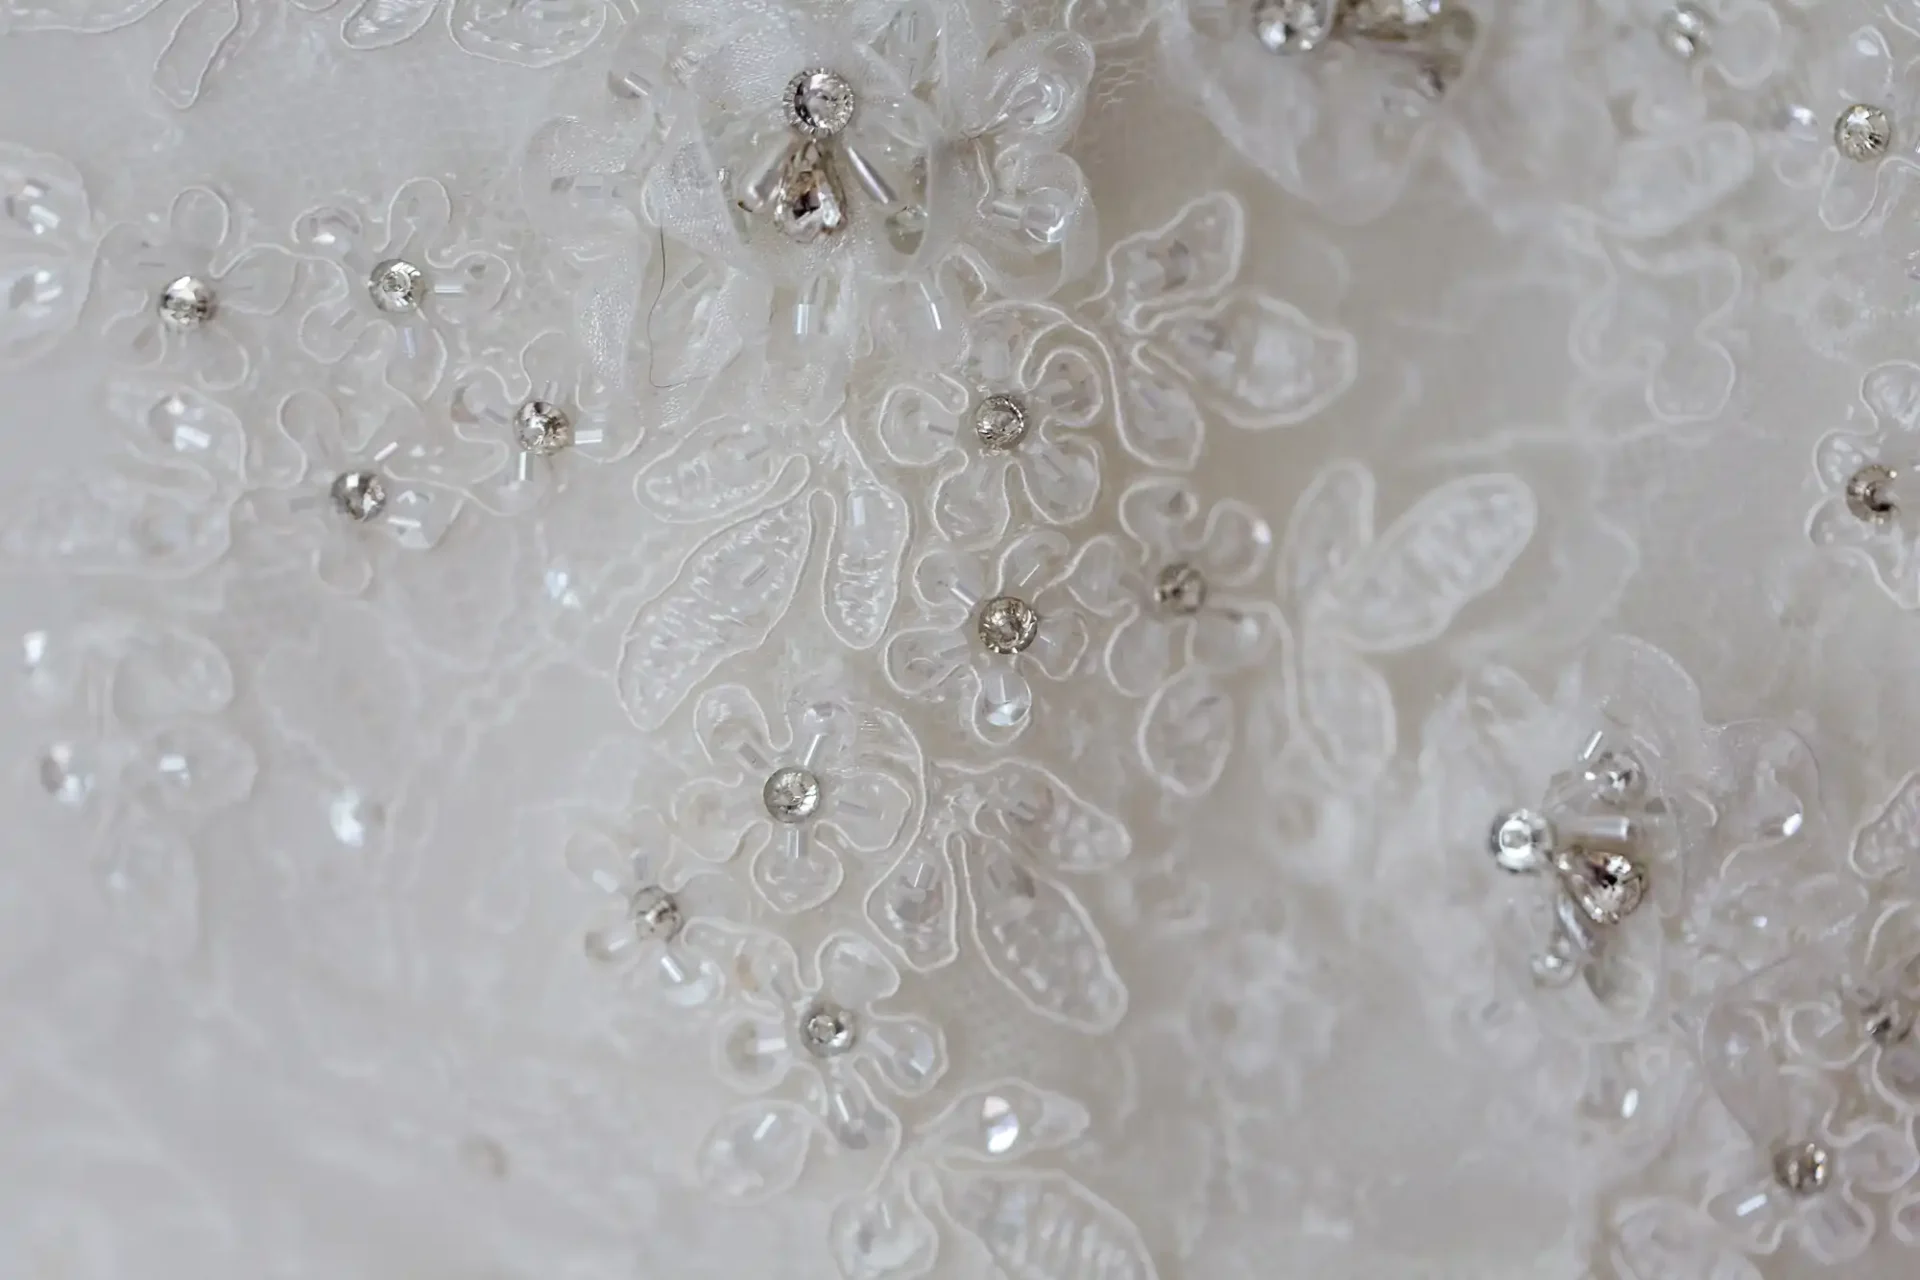 Close-up of a white wedding dress featuring detailed floral embroidery with small beads and sequins.